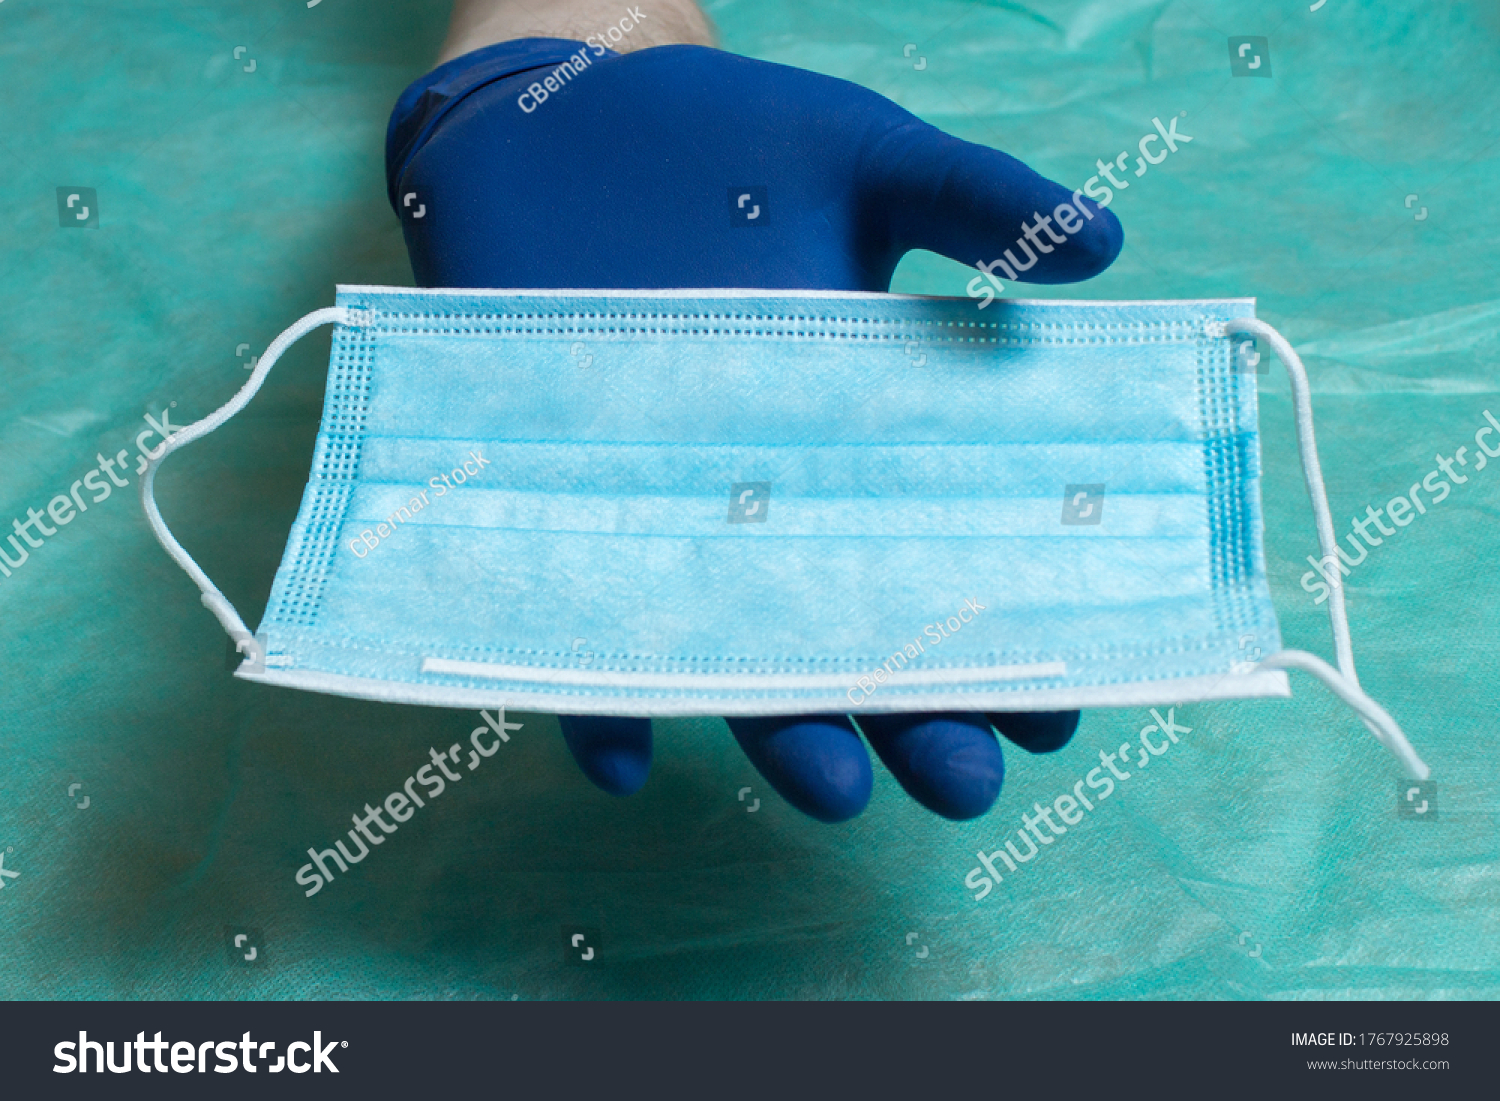 A hand protected with blue gloves shows a facial mask in the palm of his hand on a green cloth of medical surgical material. Health care and surgical concept. Personal protective
equipment. #1767925898